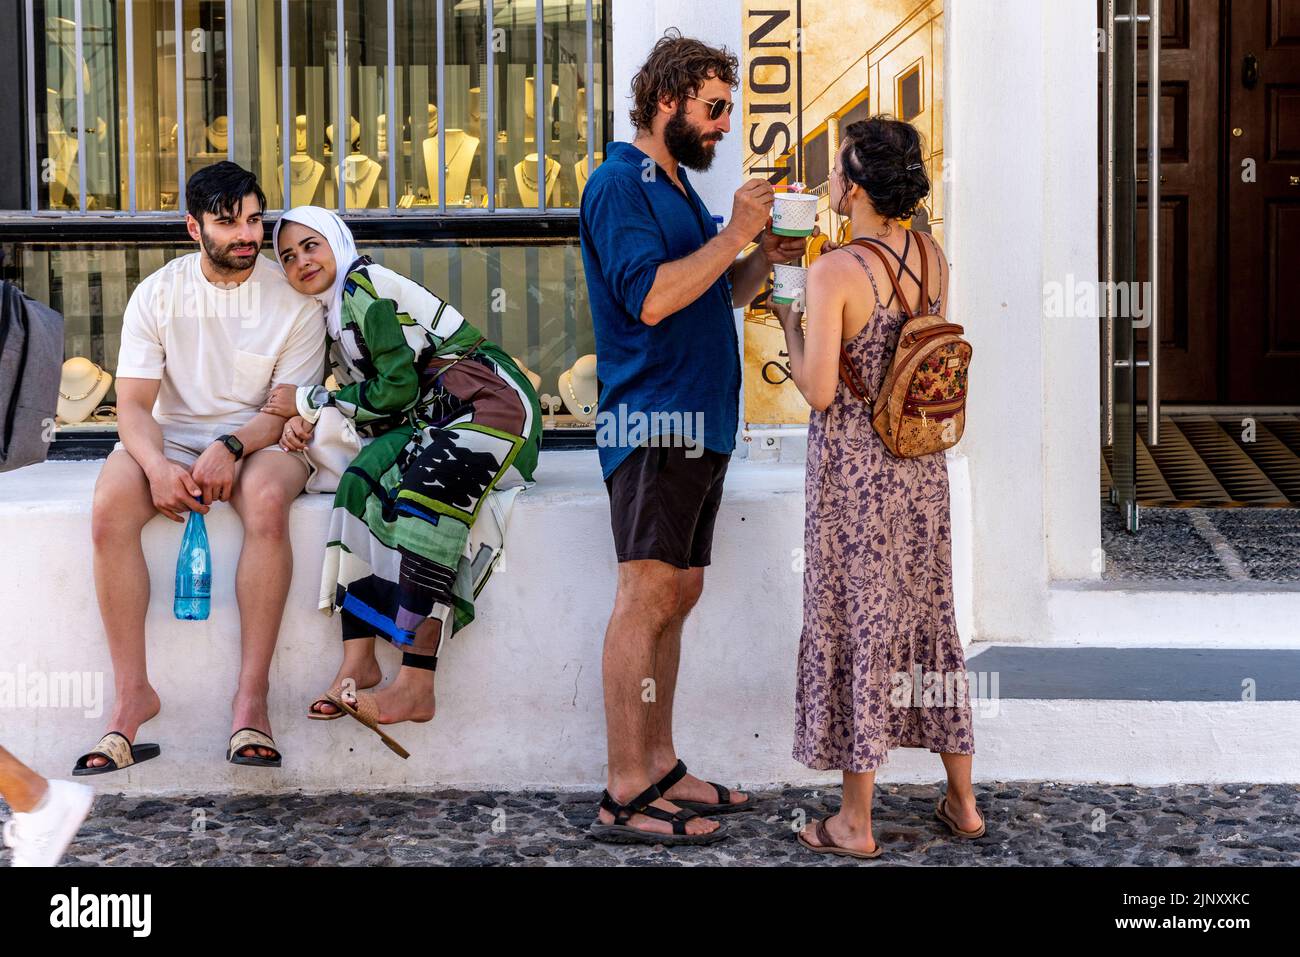 A Group Of Young Visitors In The Town Of Thira, Santorini, Greek Islands, Greece. Stock Photo